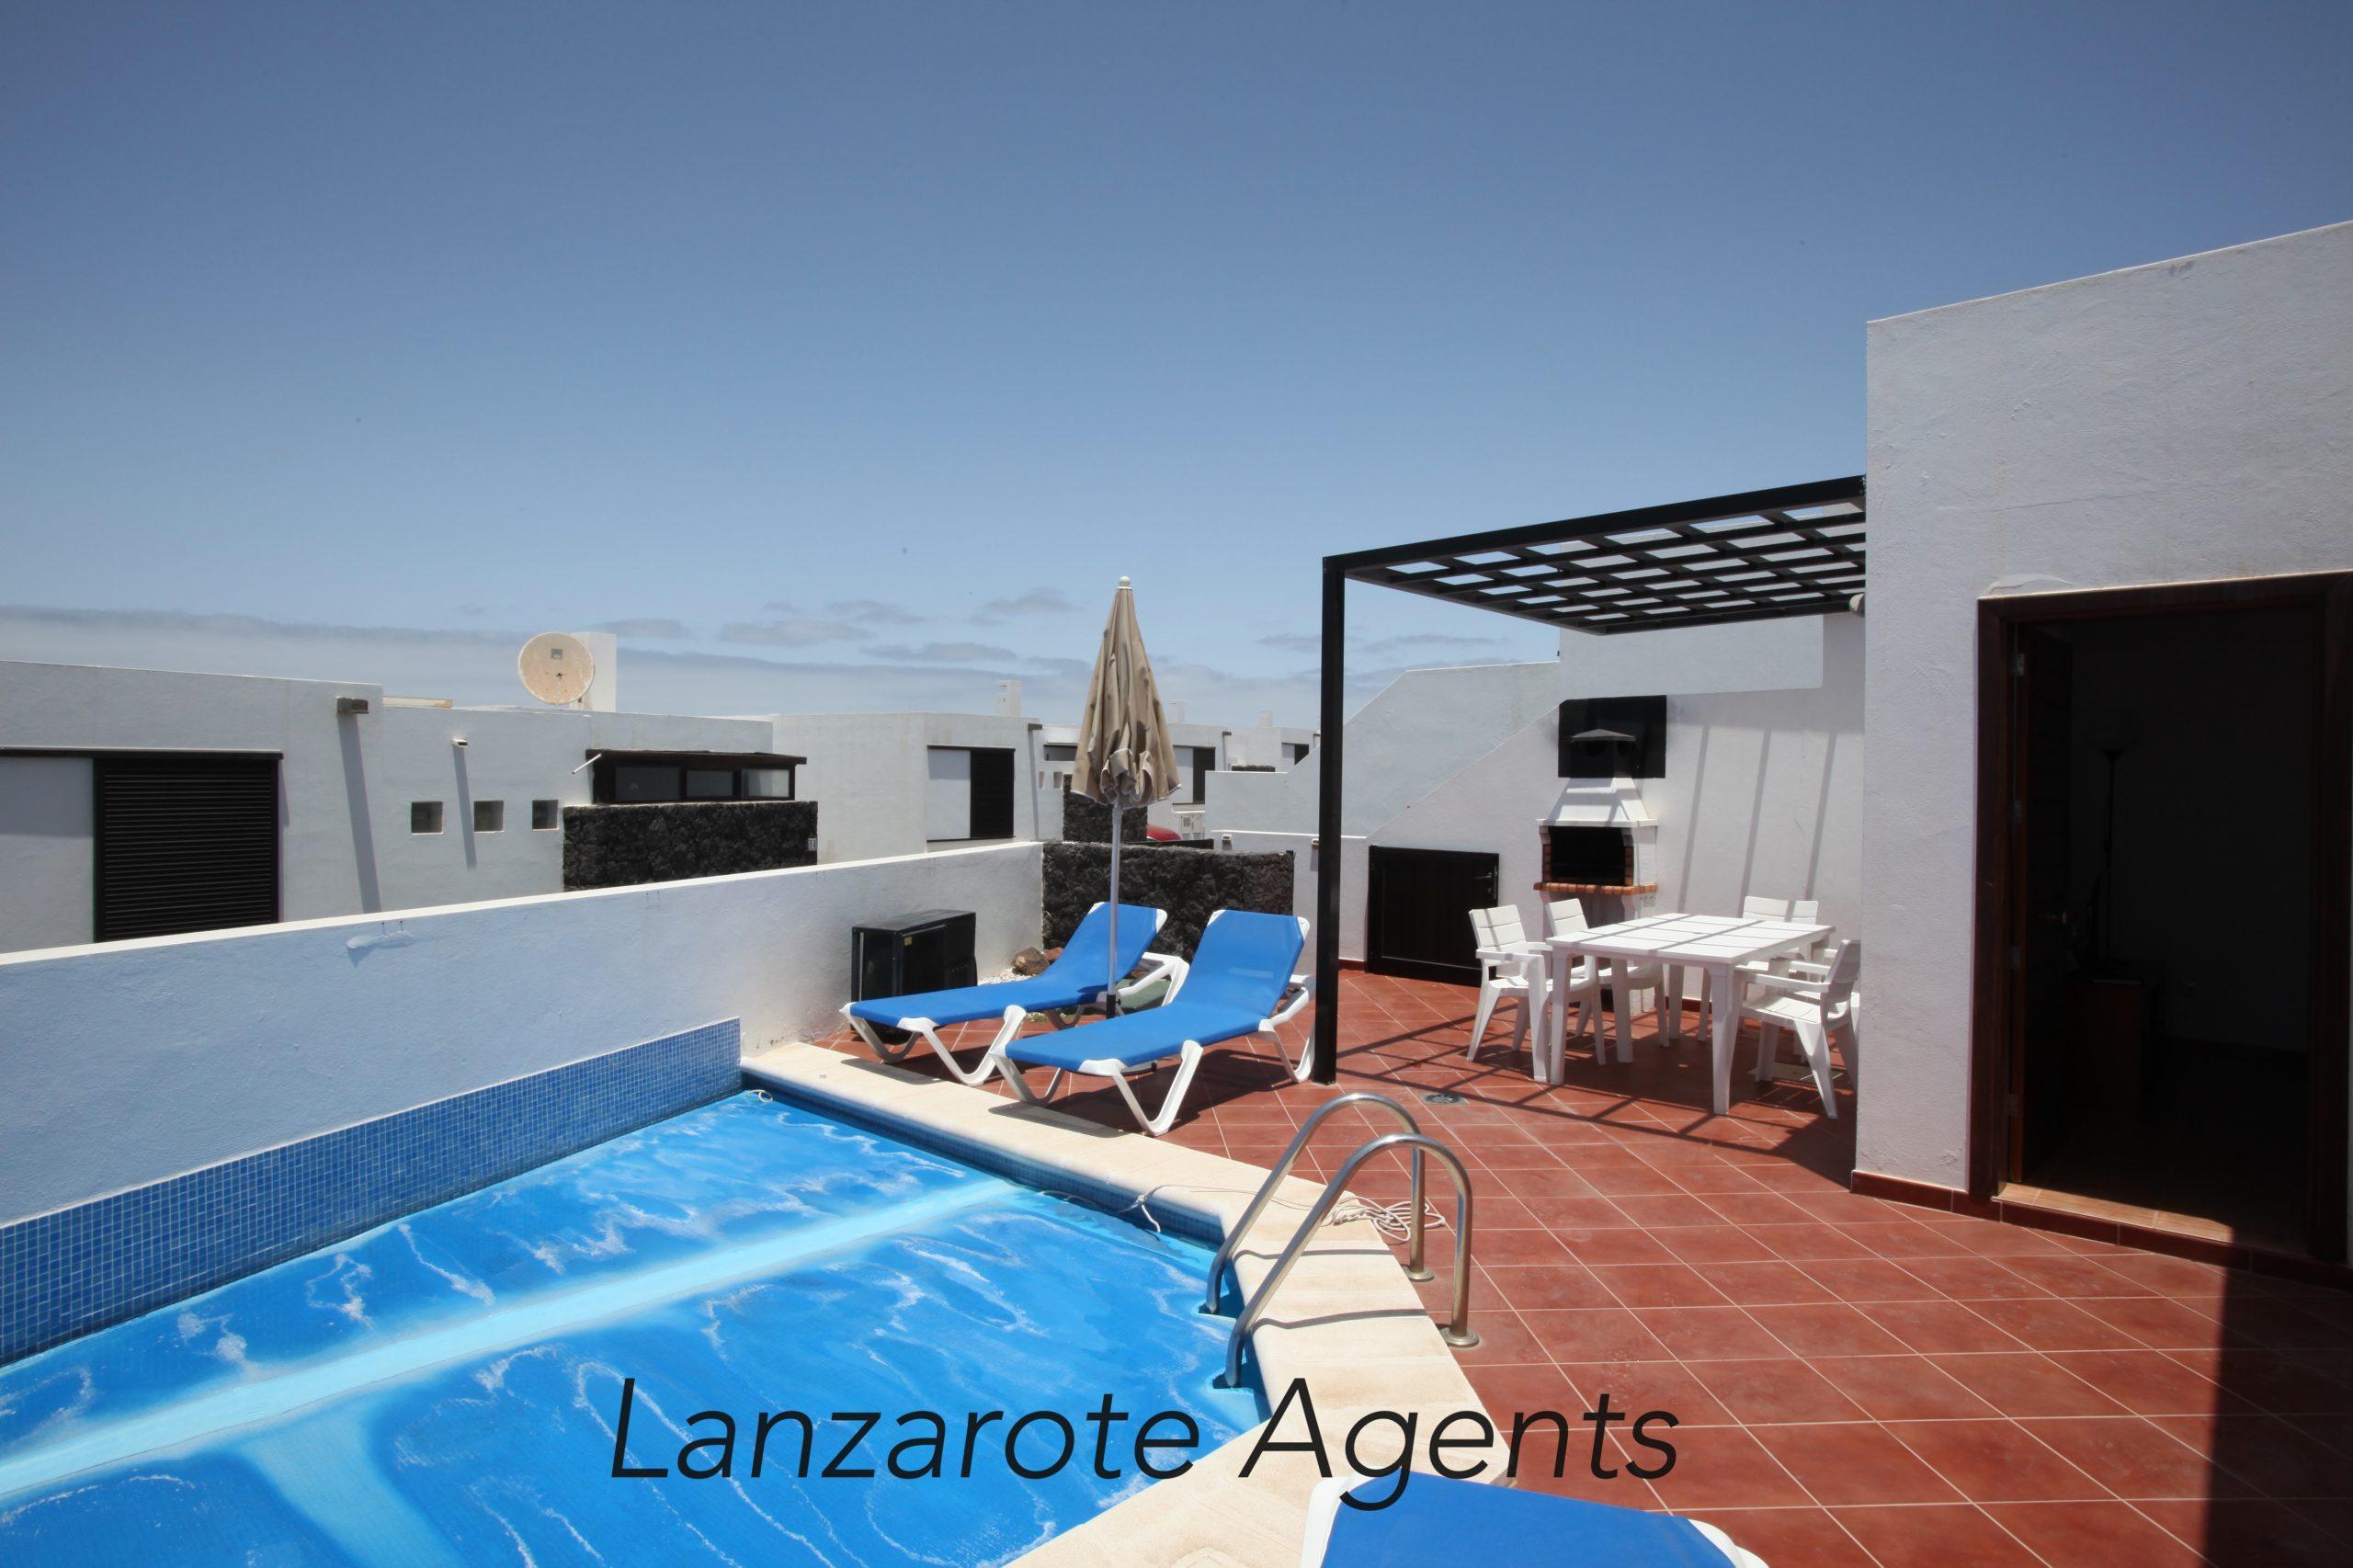 Lovely Semi Detached 3 Bedroom Villa in Playa Blanca with Private Heated Pool, Vv Rental License and at only 5 min Walk to Marina Rubicon